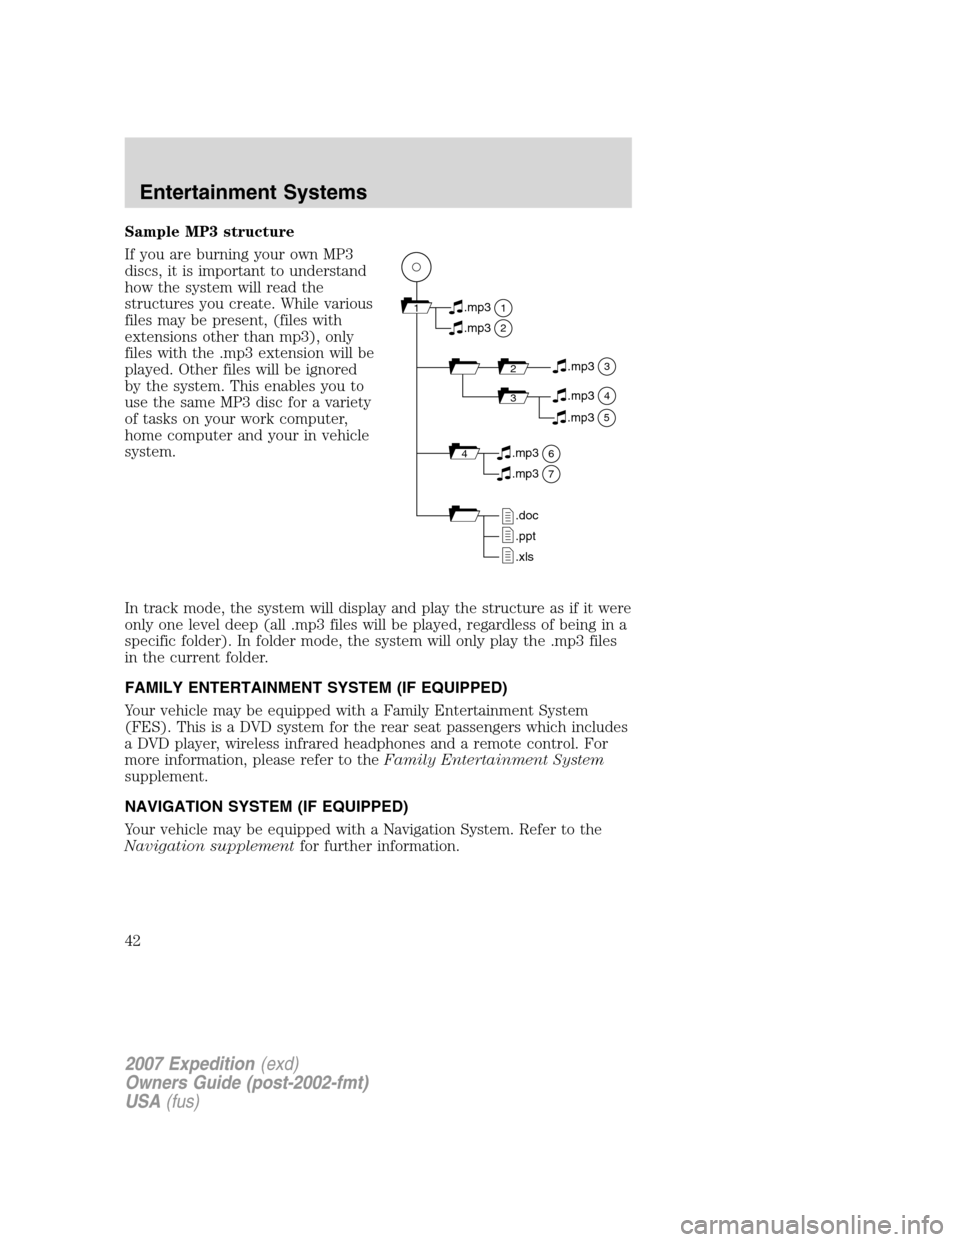 FORD EXPEDITION 2007 3.G Owners Manual Sample MP3 structure
If you are burning your own MP3
discs, it is important to understand
how the system will read the
structures you create. While various
files may be present, (files with
extensions